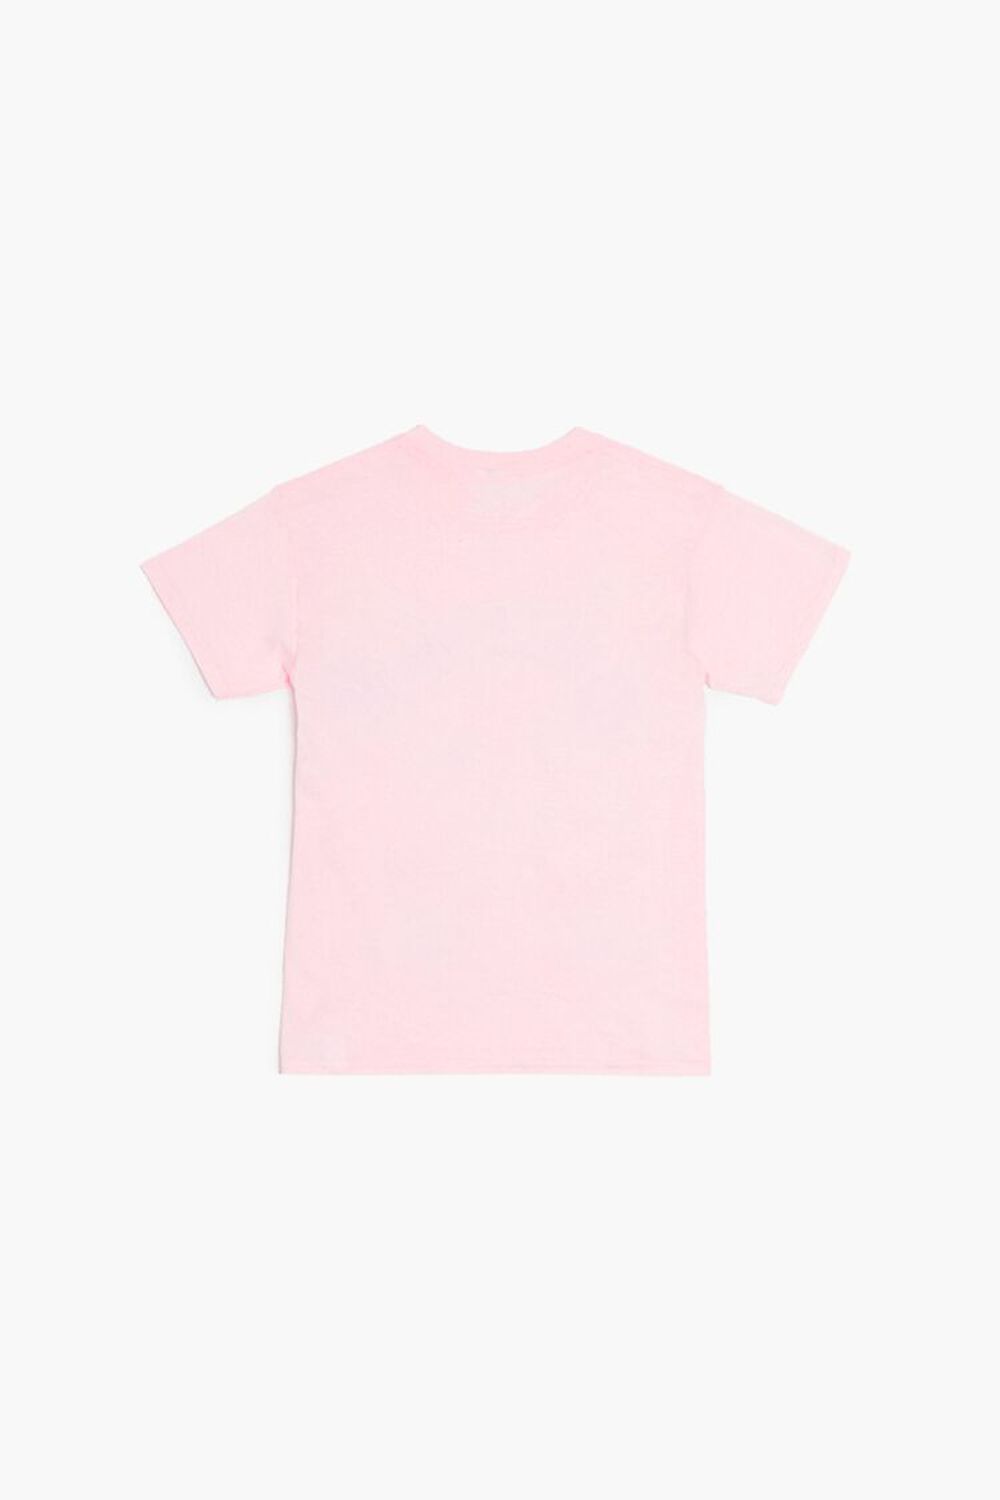 Forever 21: Sailor Moon Pink Girls Tee